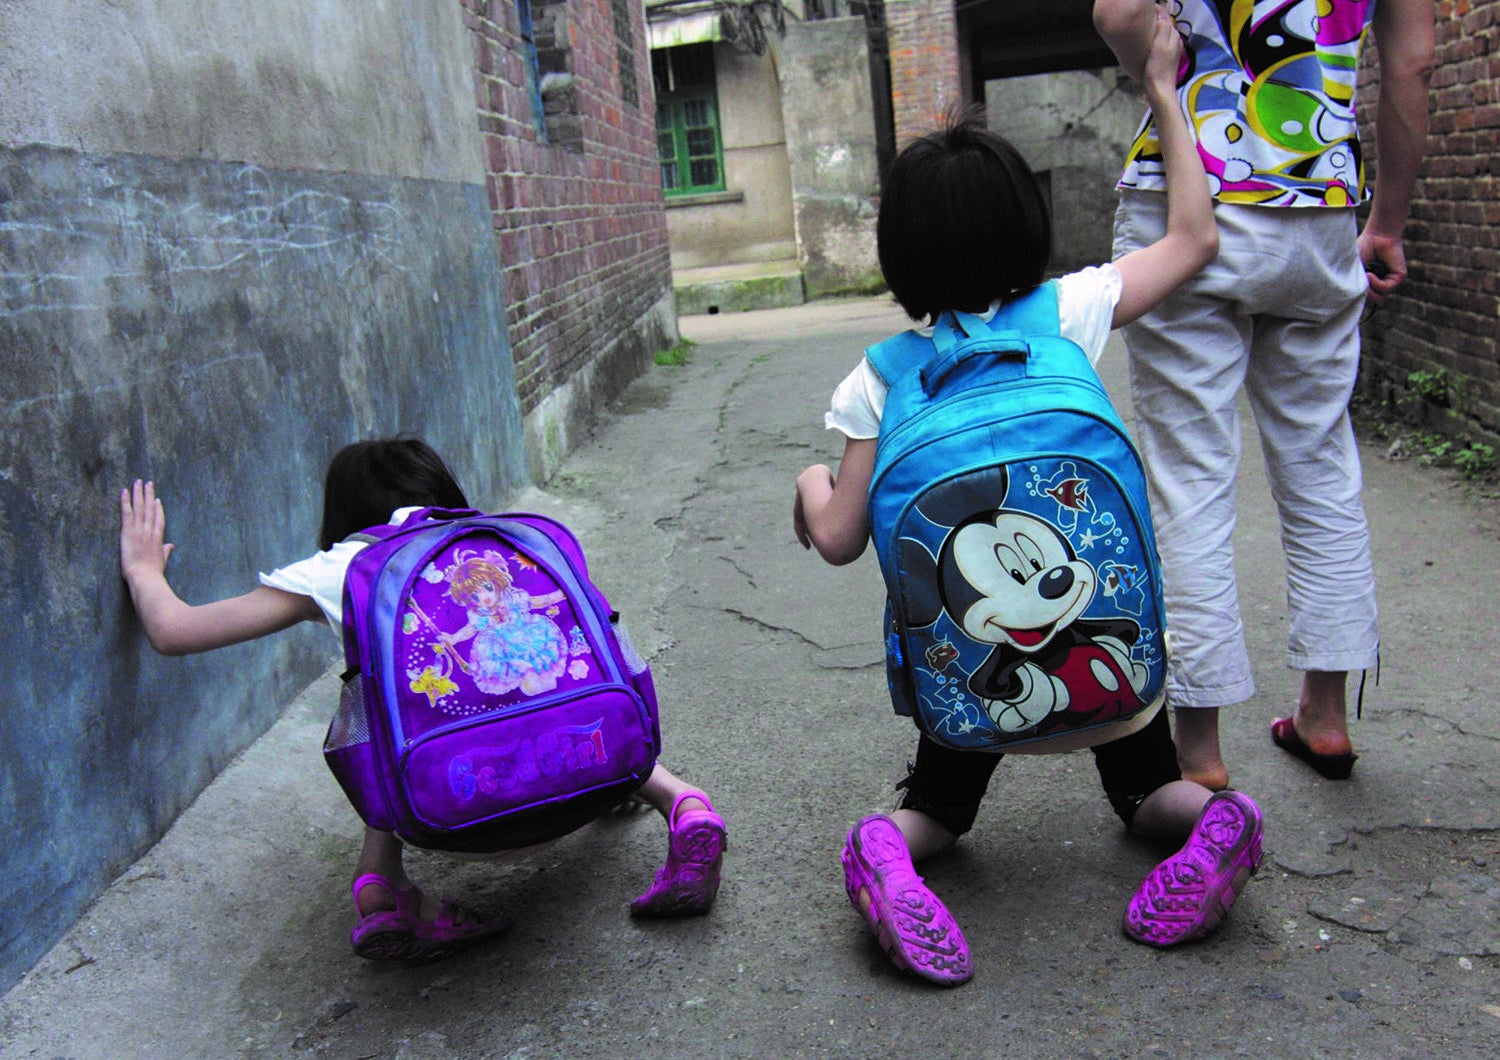 Twin sisters with mobility disabilities making their way to school.